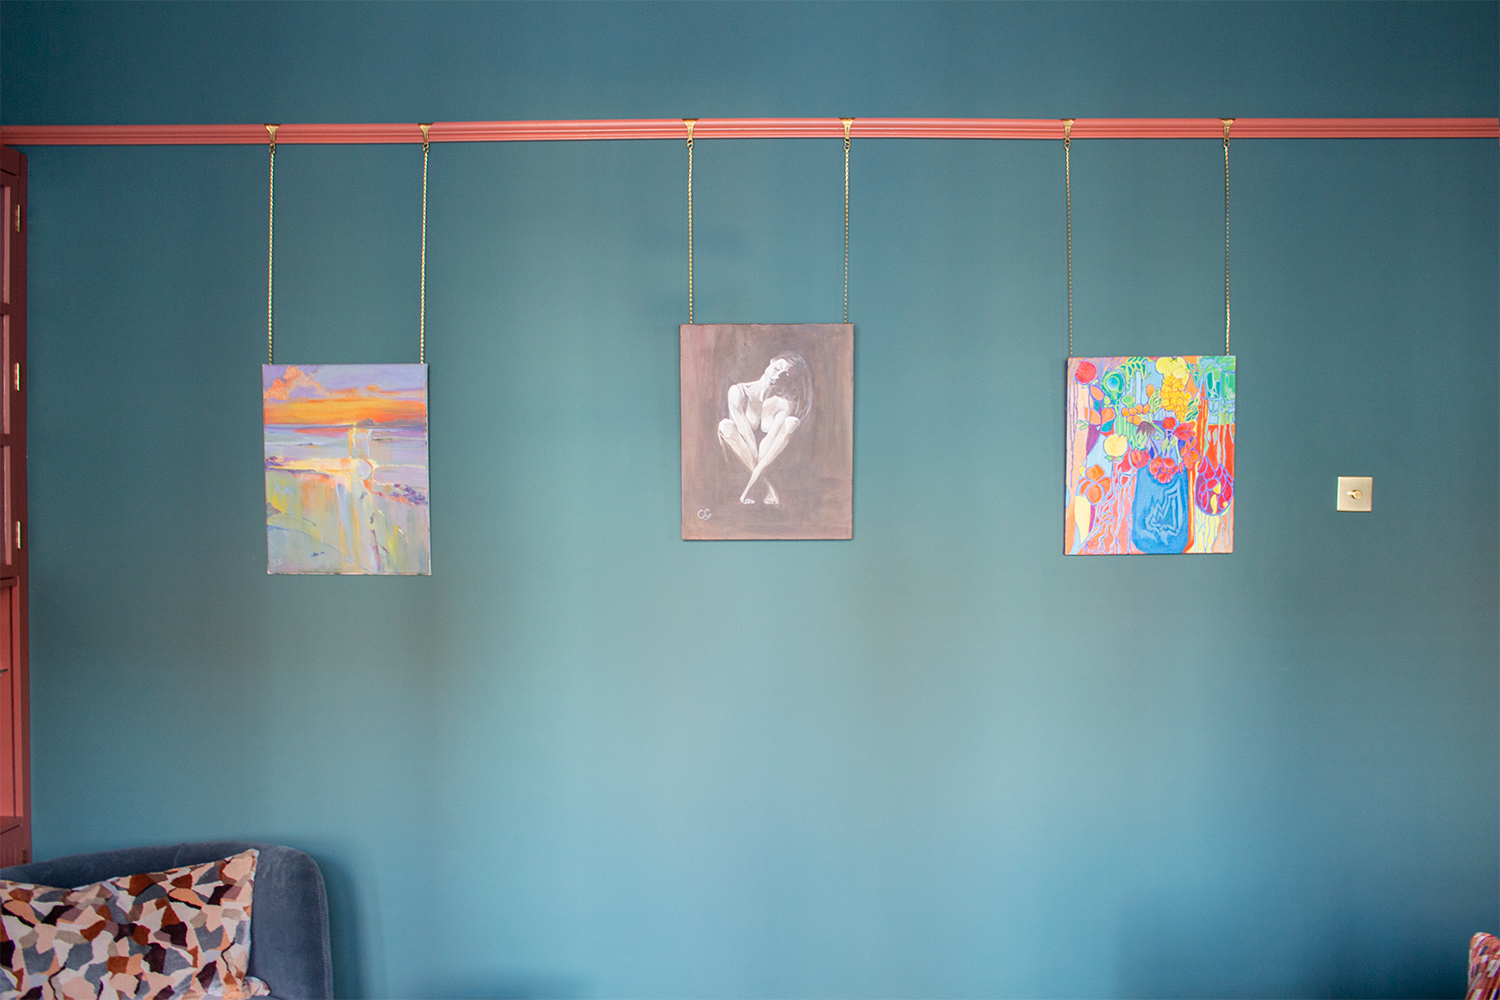 A photo of the original artwork hung in a row on the walls.